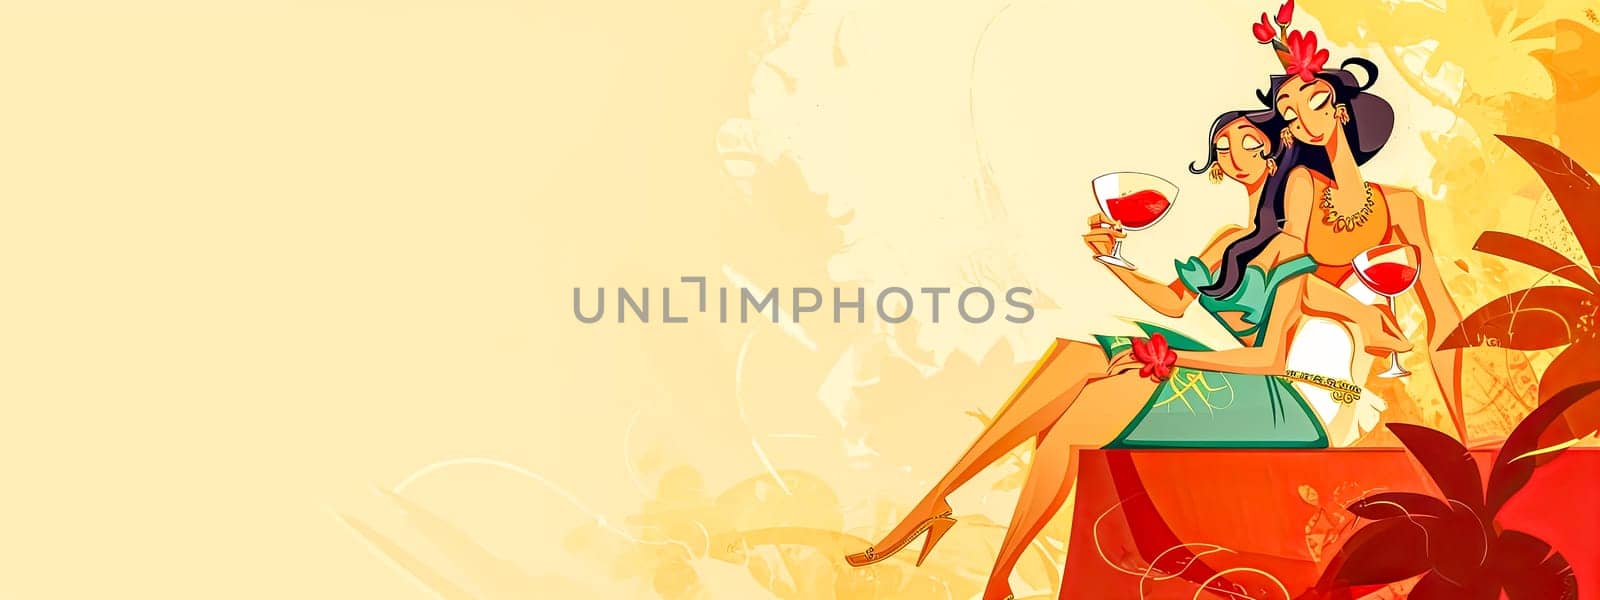 two women in elegant attire sitting back-to-back, each holding a wine glass, with a floral motif and abstract elements in a yellow and orange color scheme, event banner with space for text.